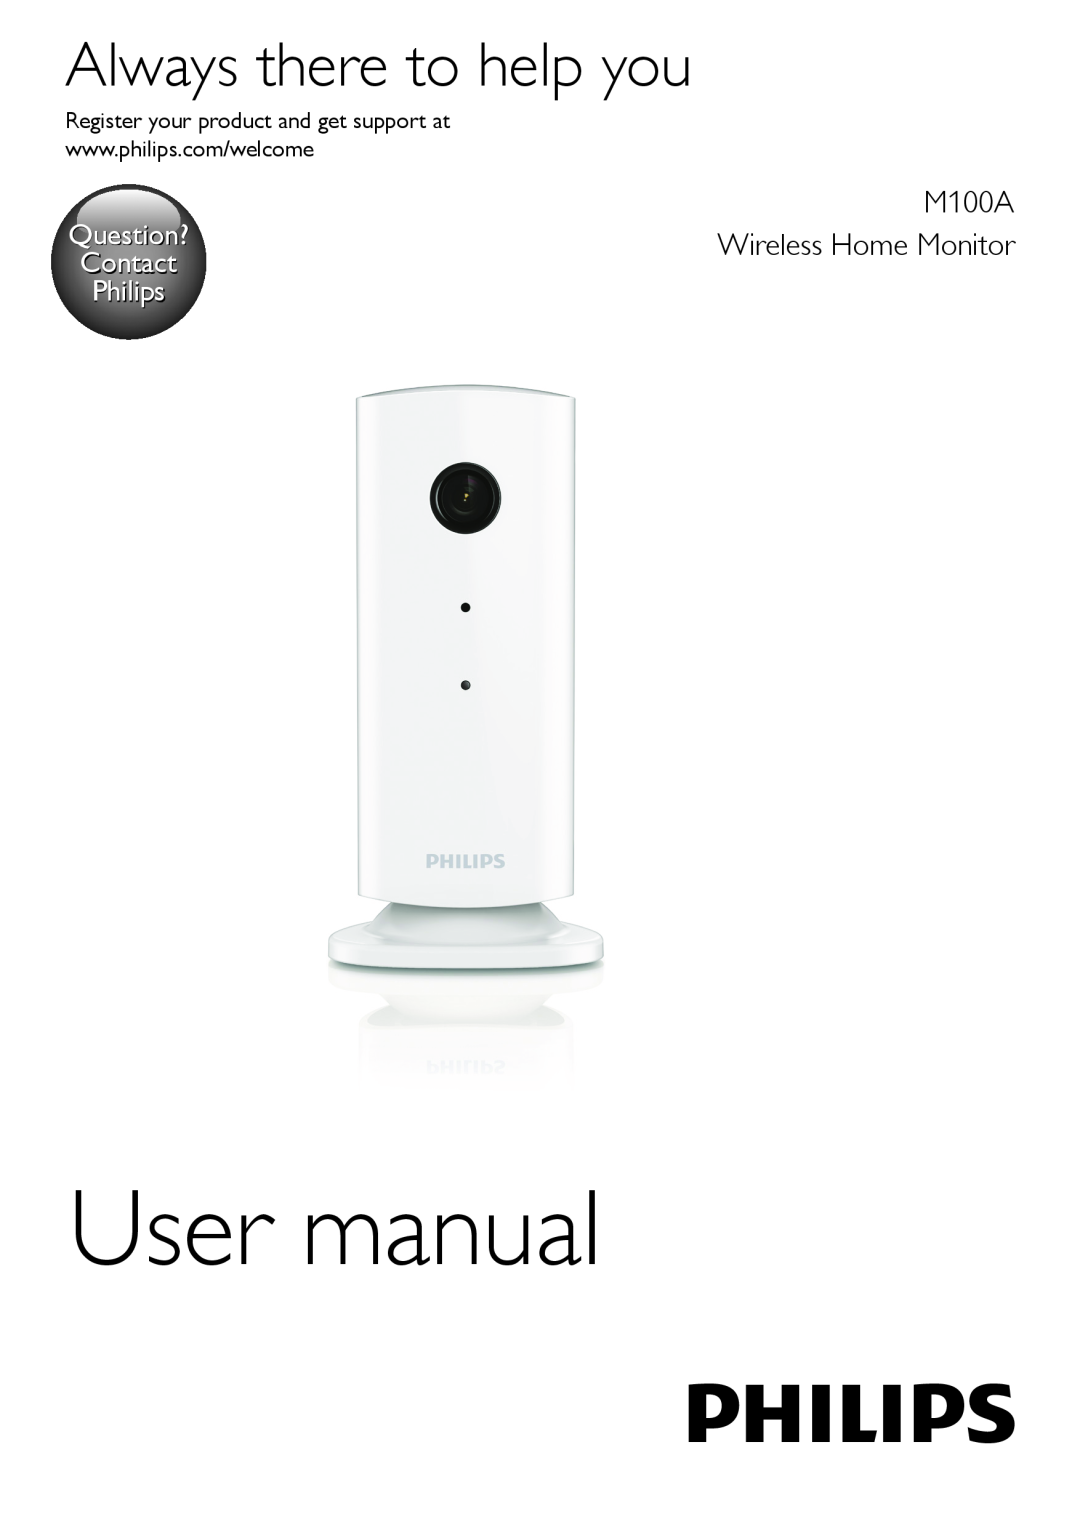 Philips user manual M100A Wireless Home Monitor, Always there to help you, Question? Contact Philips 